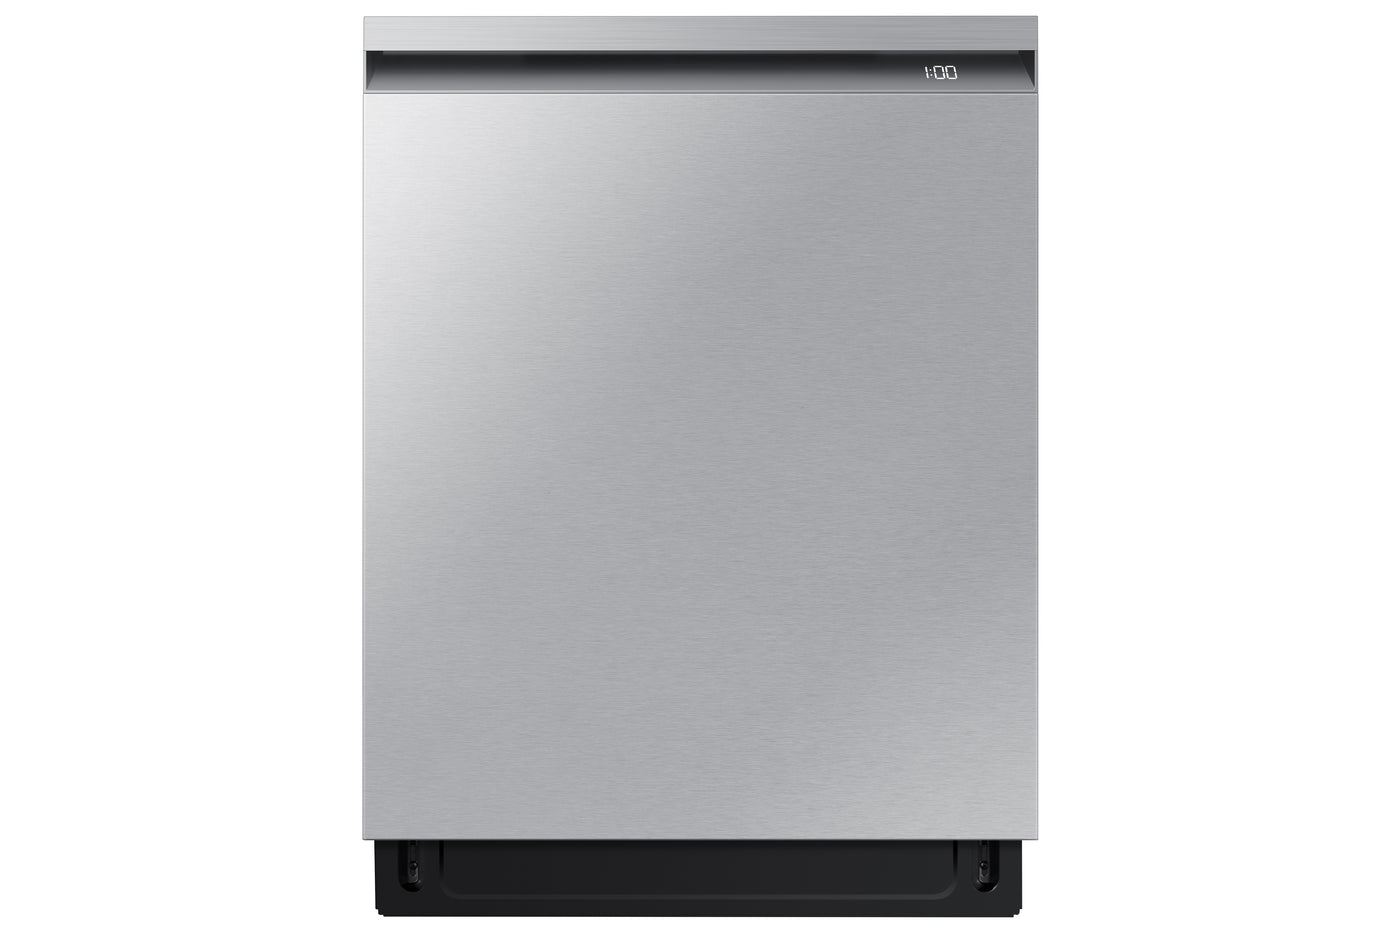 Samsung Stainless Steel Built-In Dishwasher with Smart Dry - DW80B7070US/AC